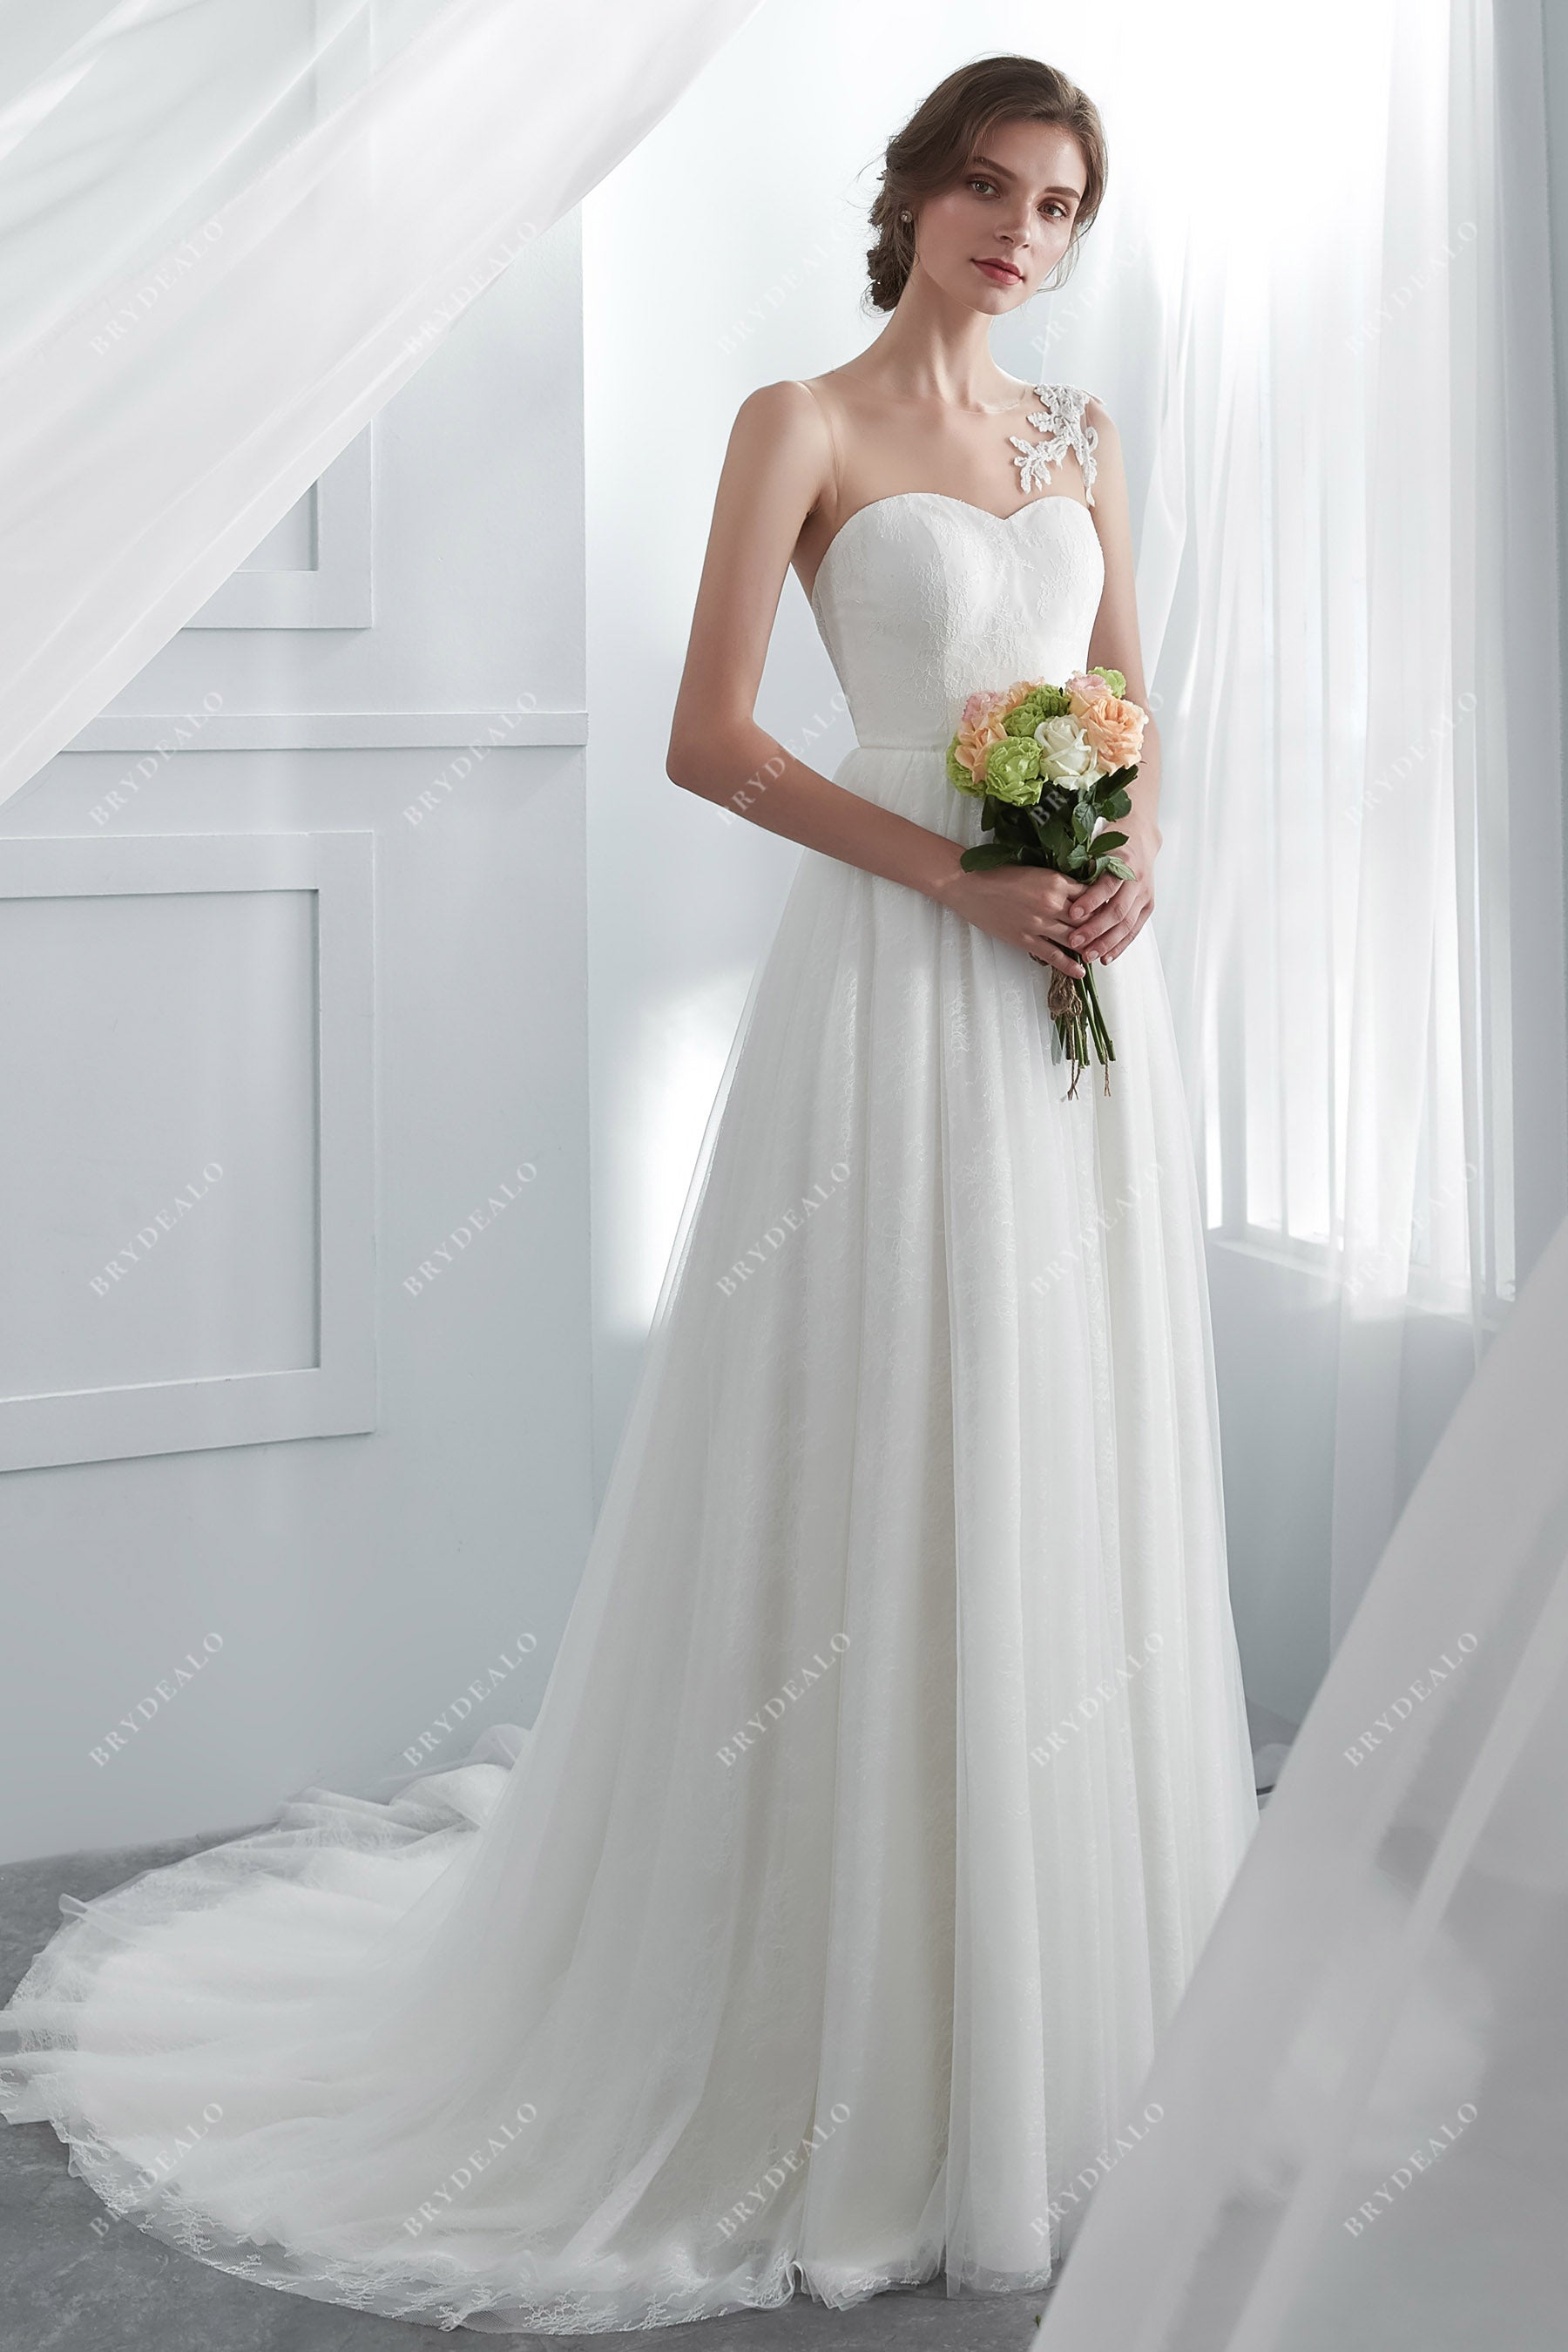 Designer Beaded Lace Illusion A-line Bridal Gown